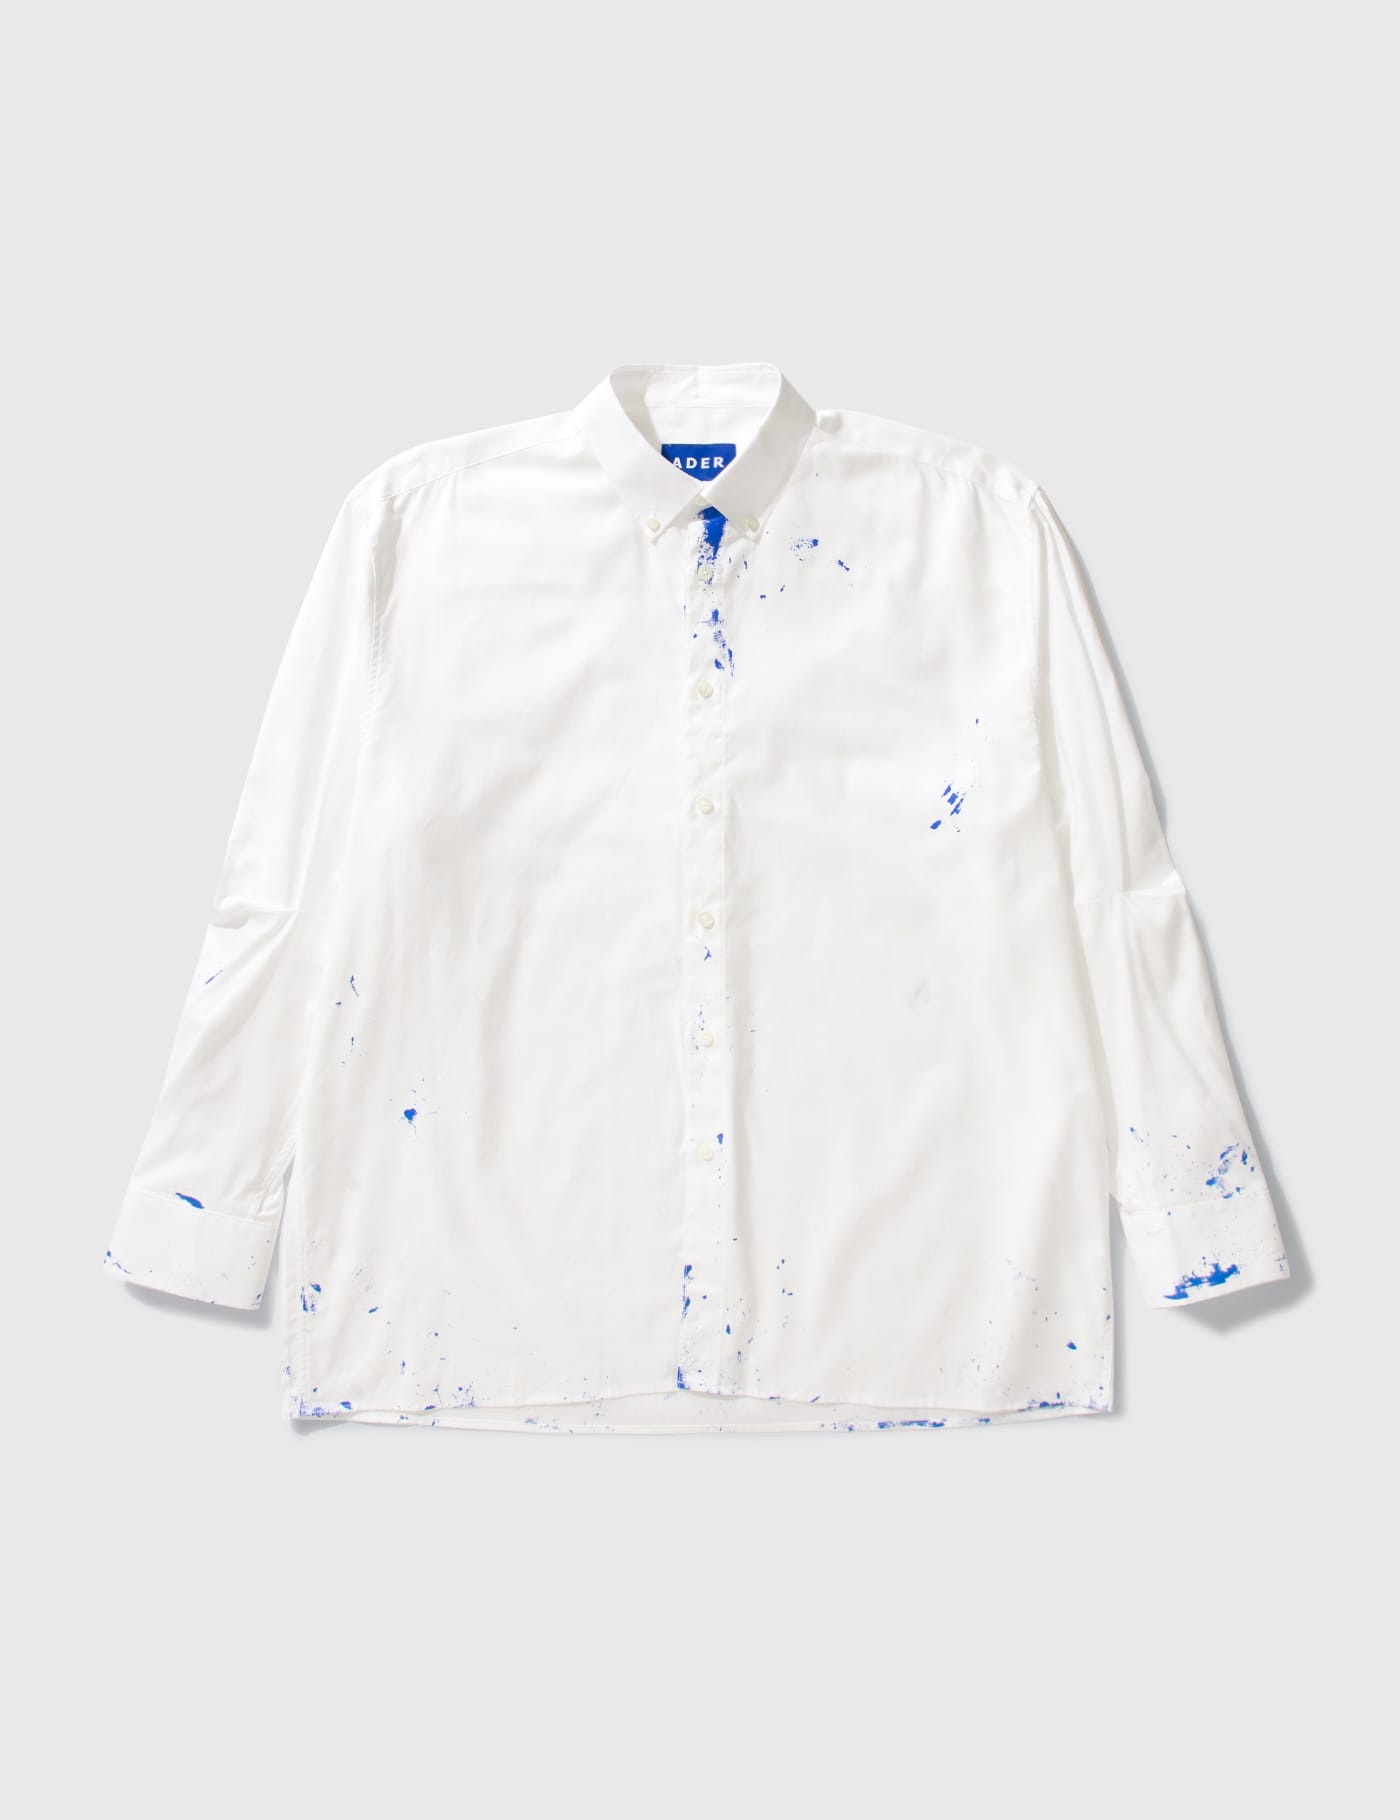 Ader Error - Splash Shirt | HBX - Globally Curated Fashion and Lifestyle by  Hypebeast